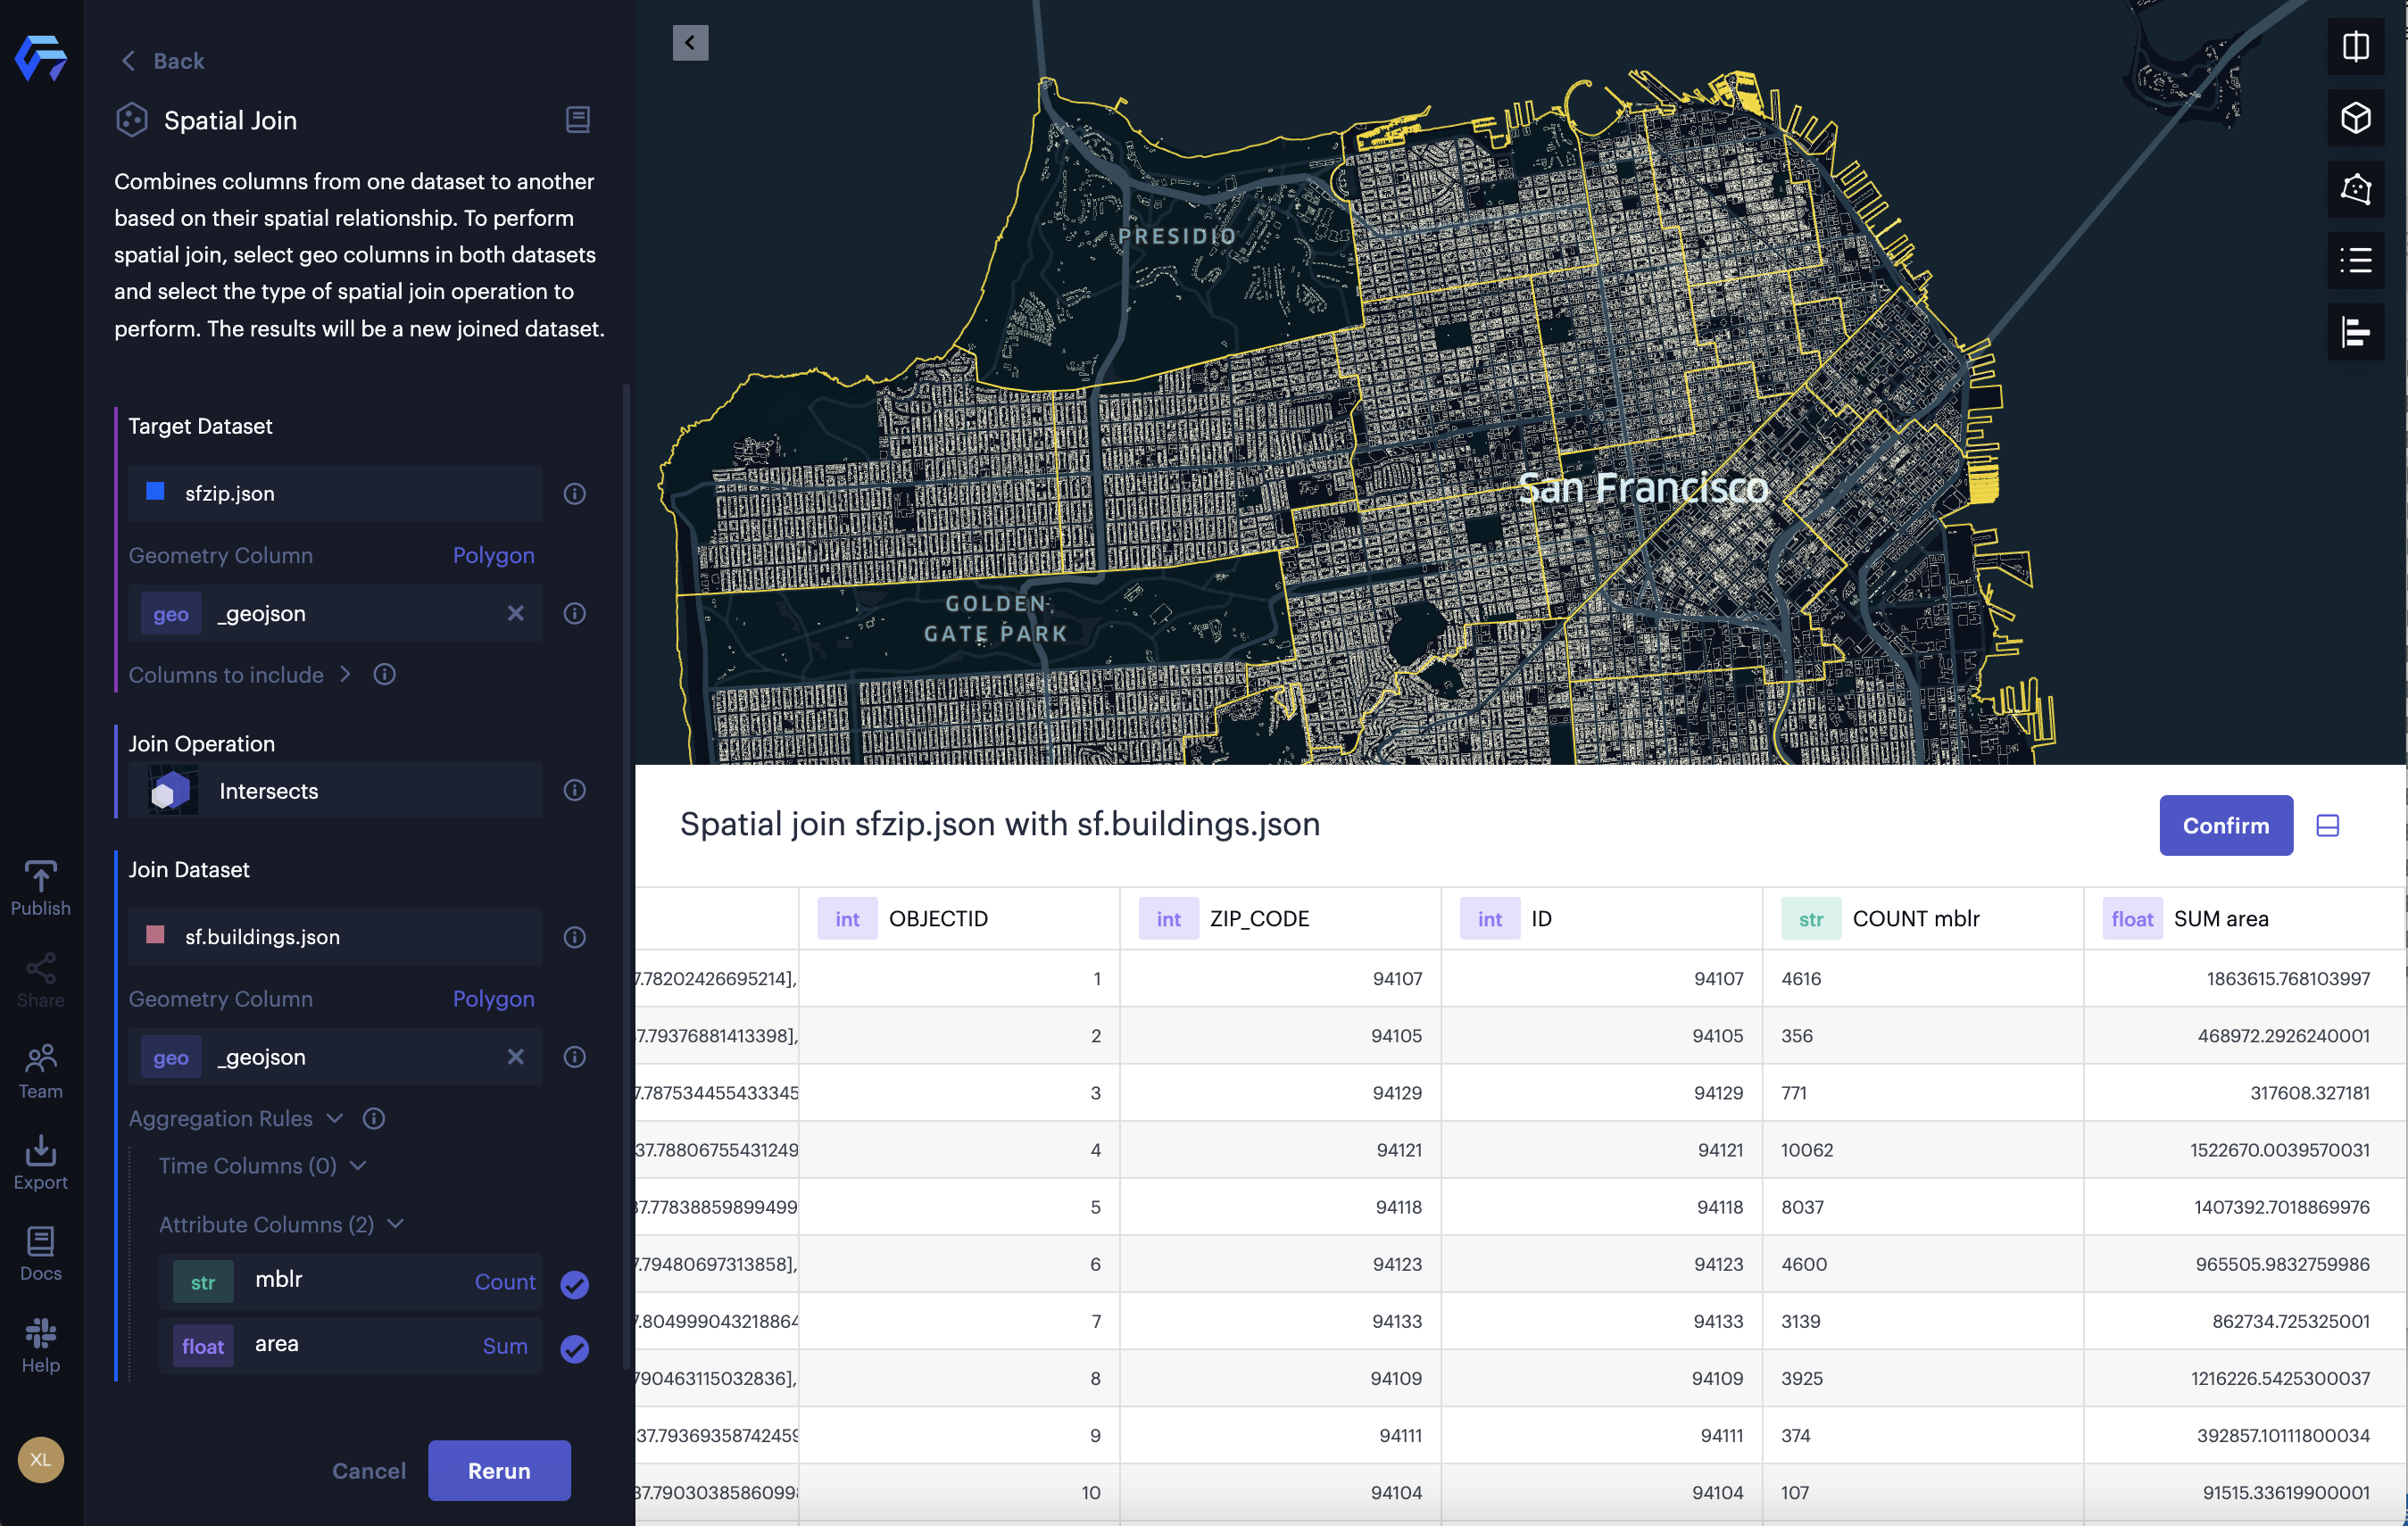 Spatial join the building footprints with zip code area in San Francisco.